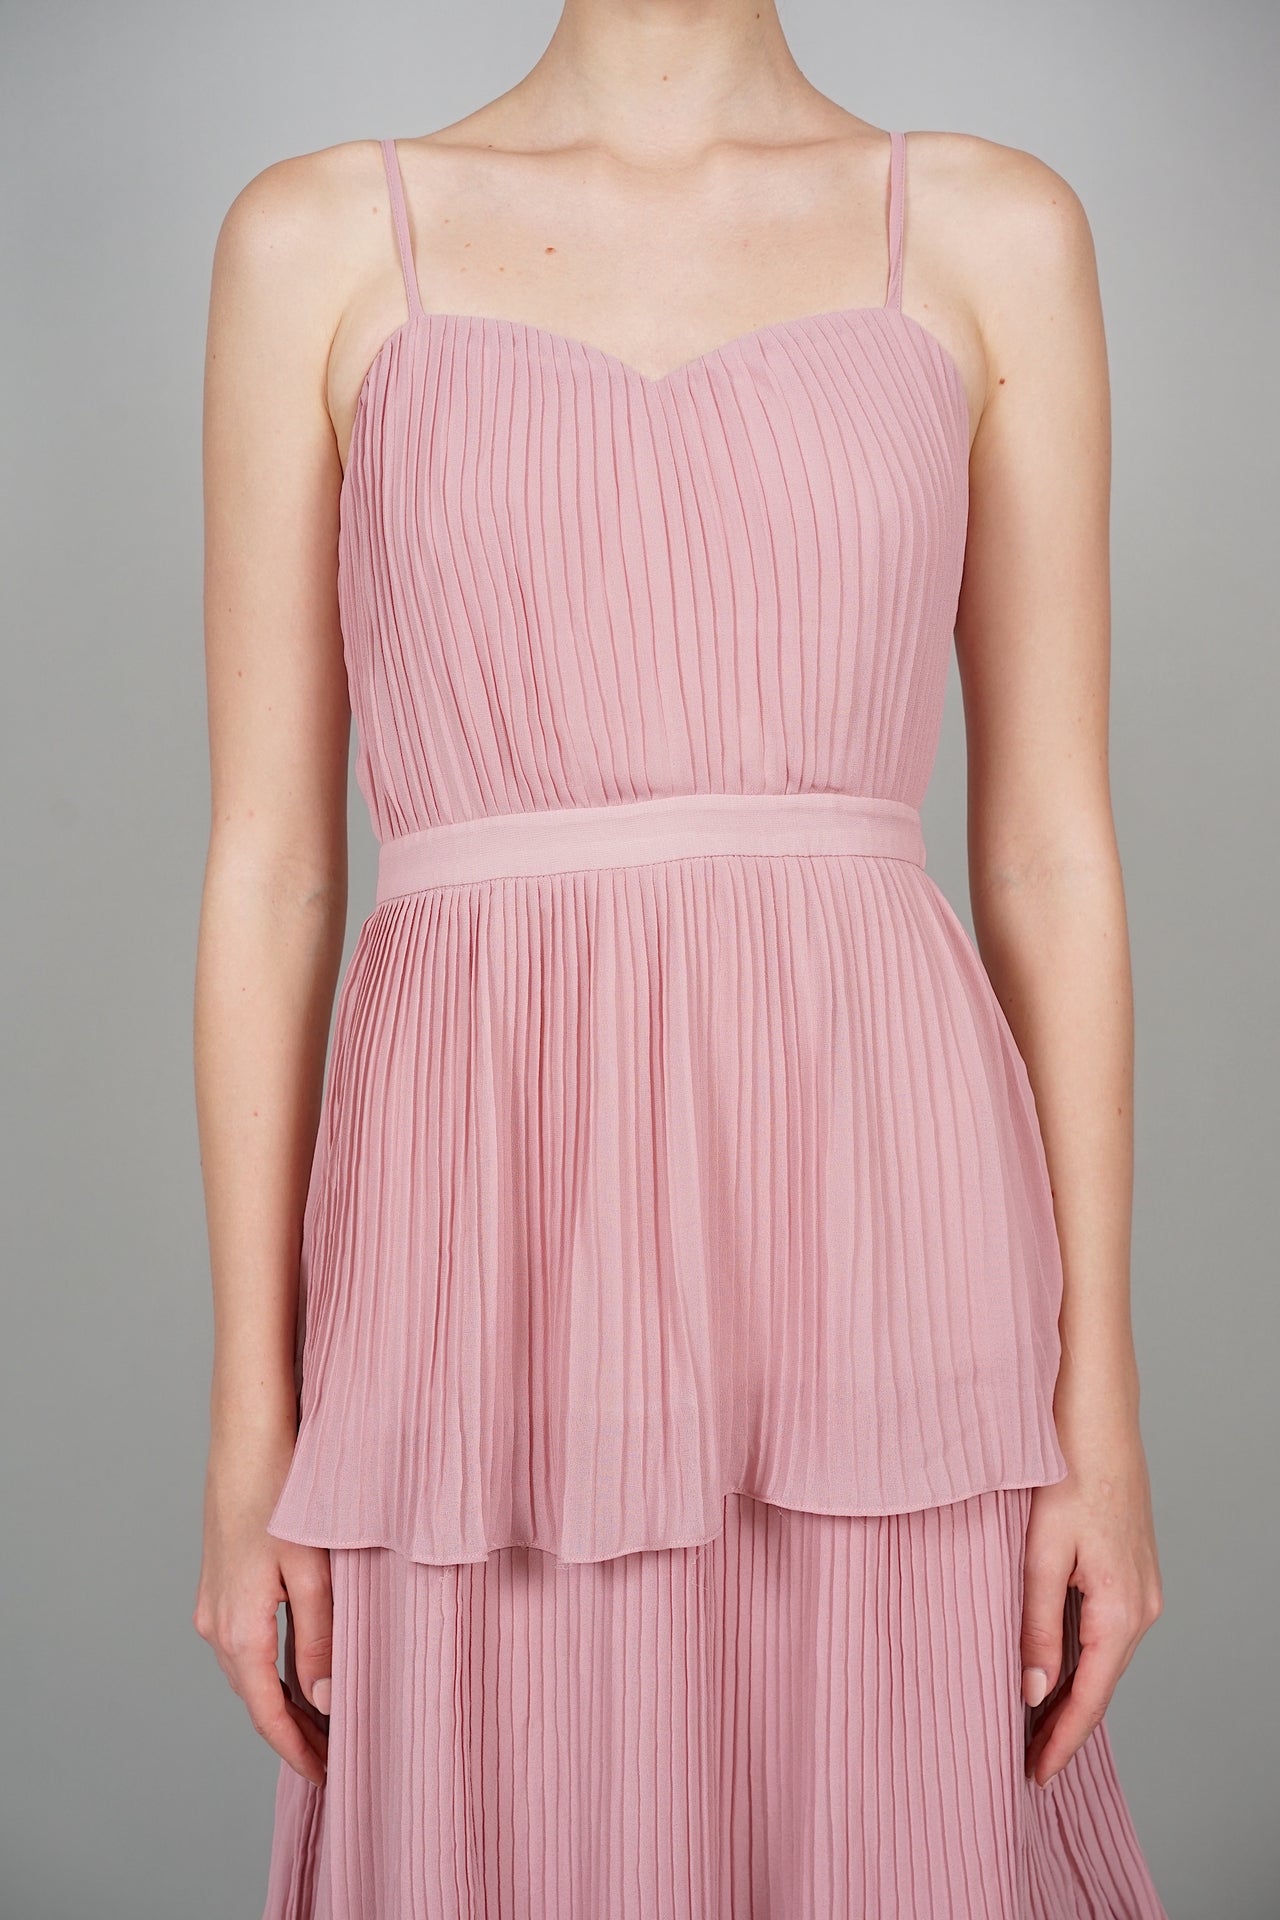 Wendy Tiered Dress in Pink